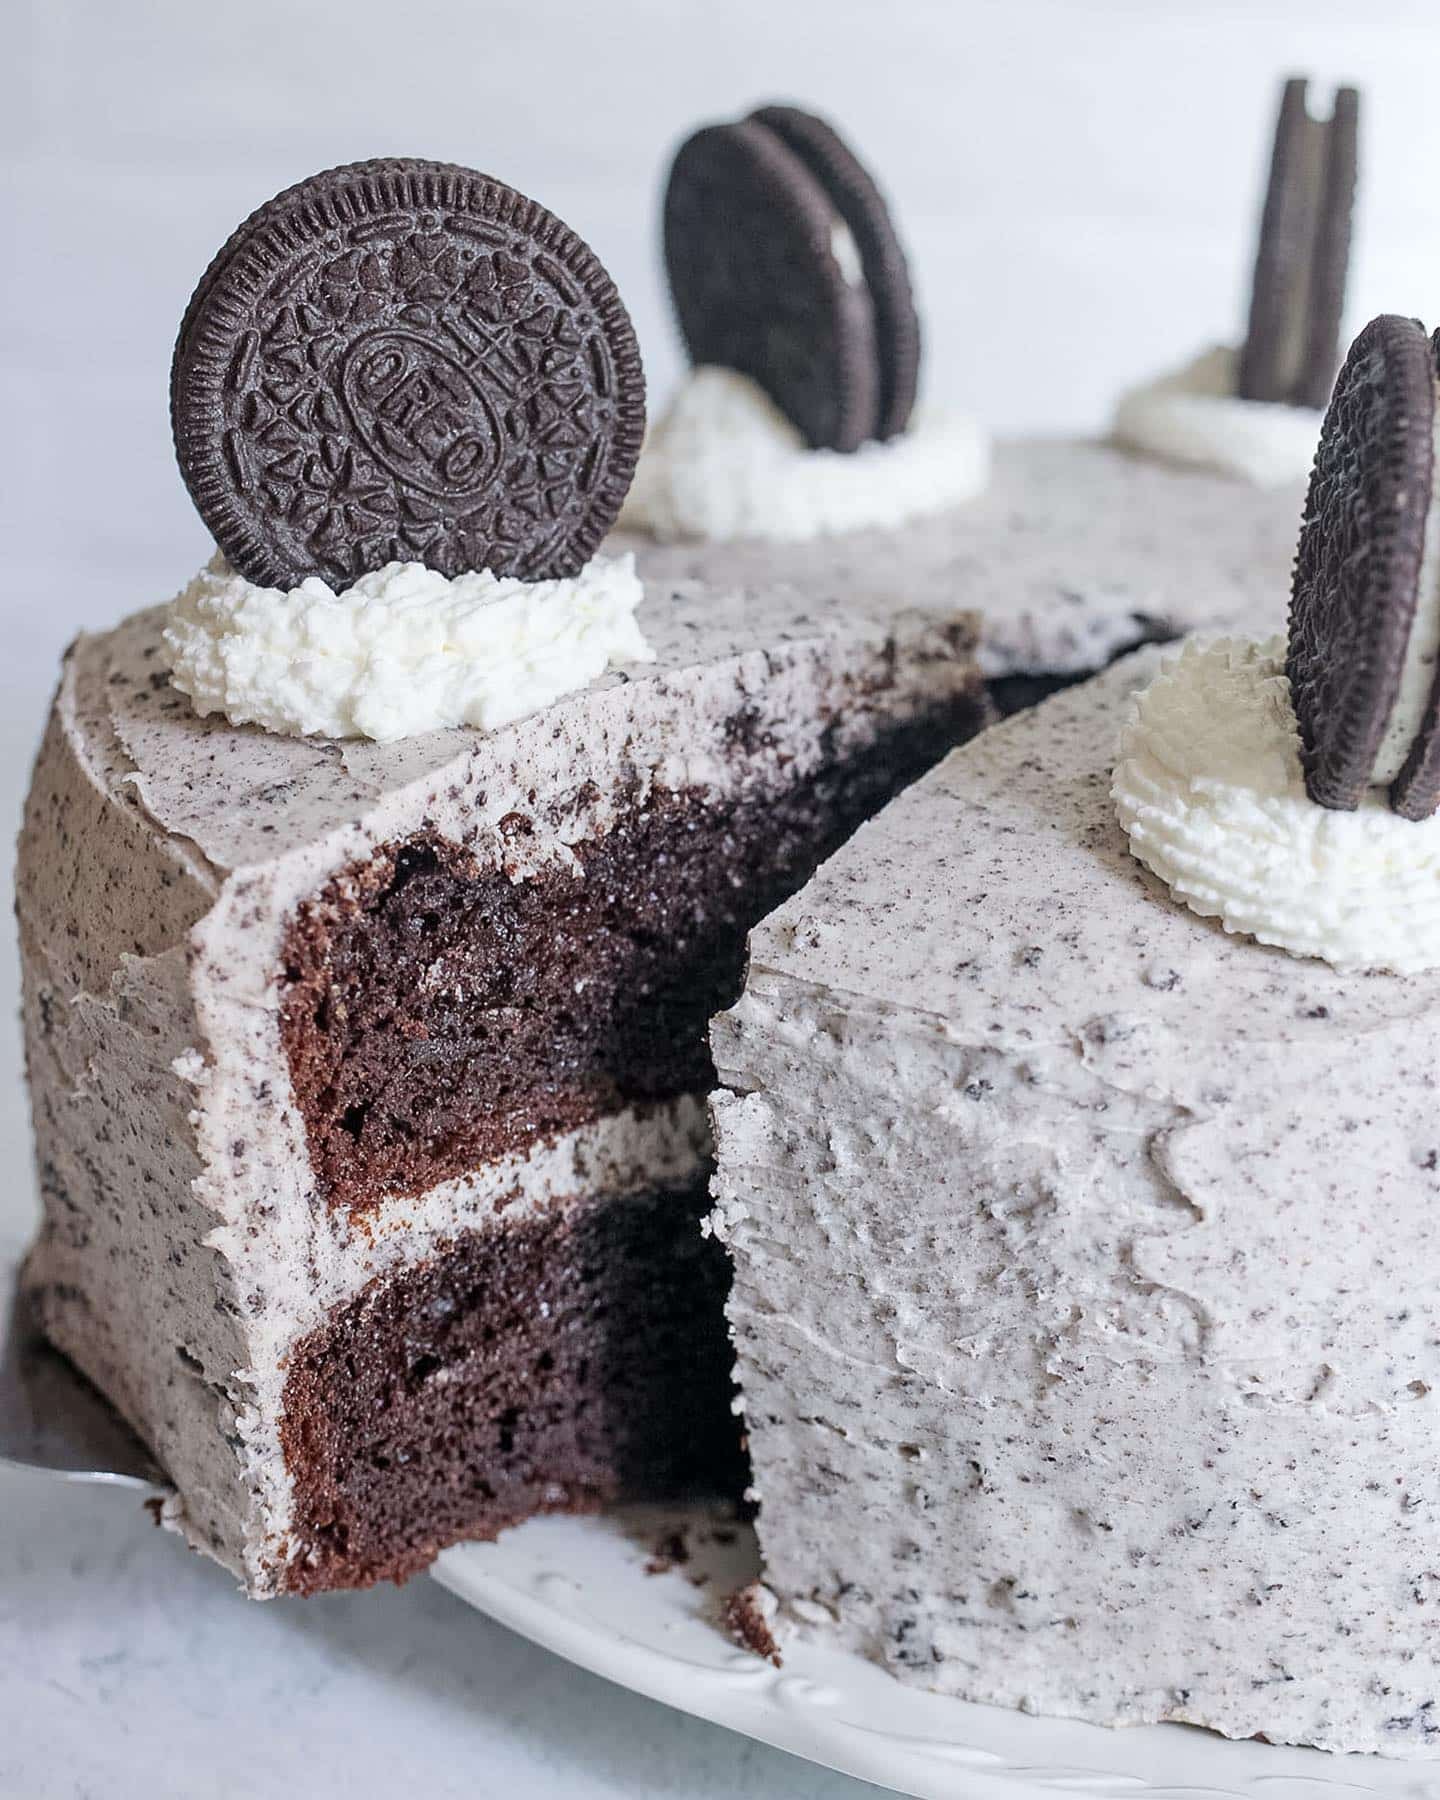 Im in love with this Oreo cake. It is so easy to make because I used boxed devils food cake as the main ingredient. The recipe is up at my Mashed.com link. 

#cakerecipe #oreocake #oreocakerecipe #easycakerecipe #cakesofinstagram #cakesofinsta #foodphotography #foodphoto #cakephotography